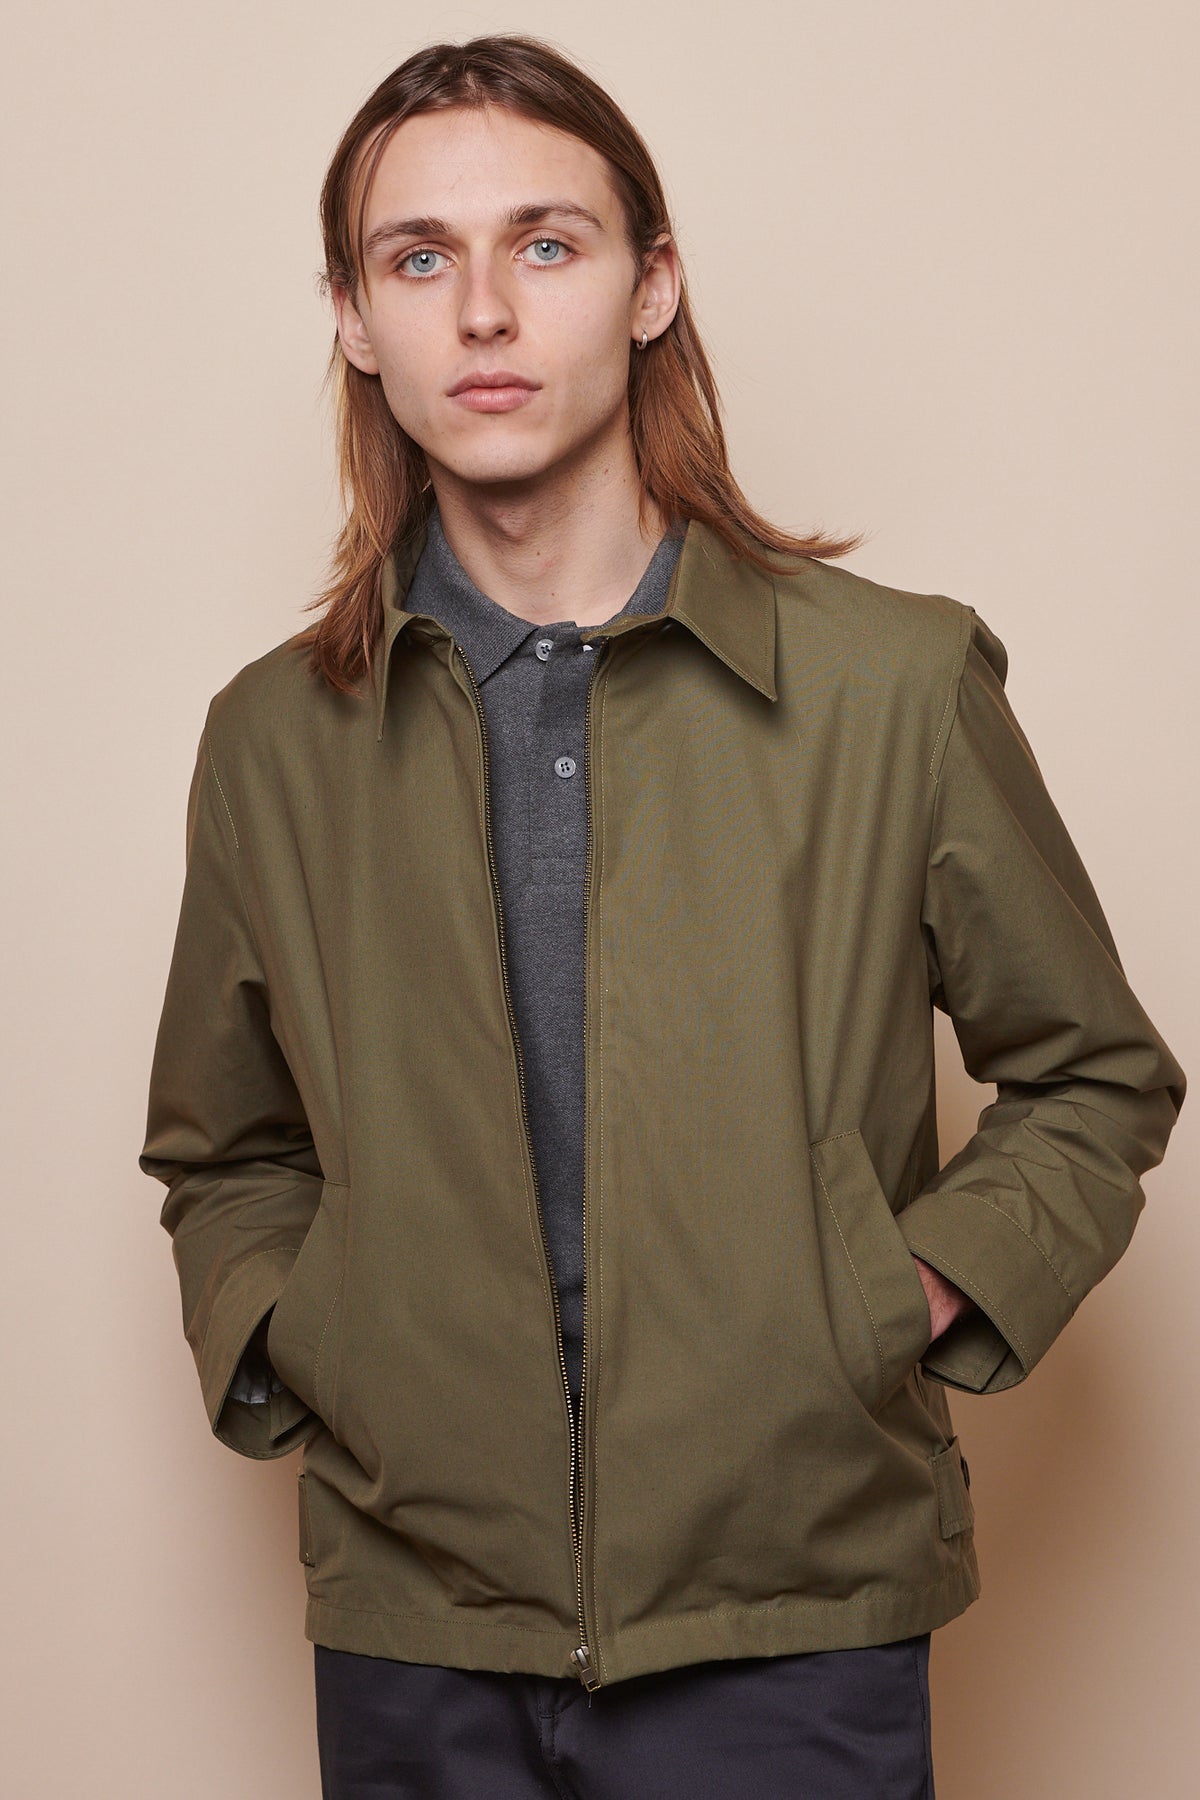 
            Thigh up image of male wearing unzipped collared Harrington jacket in olive with both hands in front pockets 